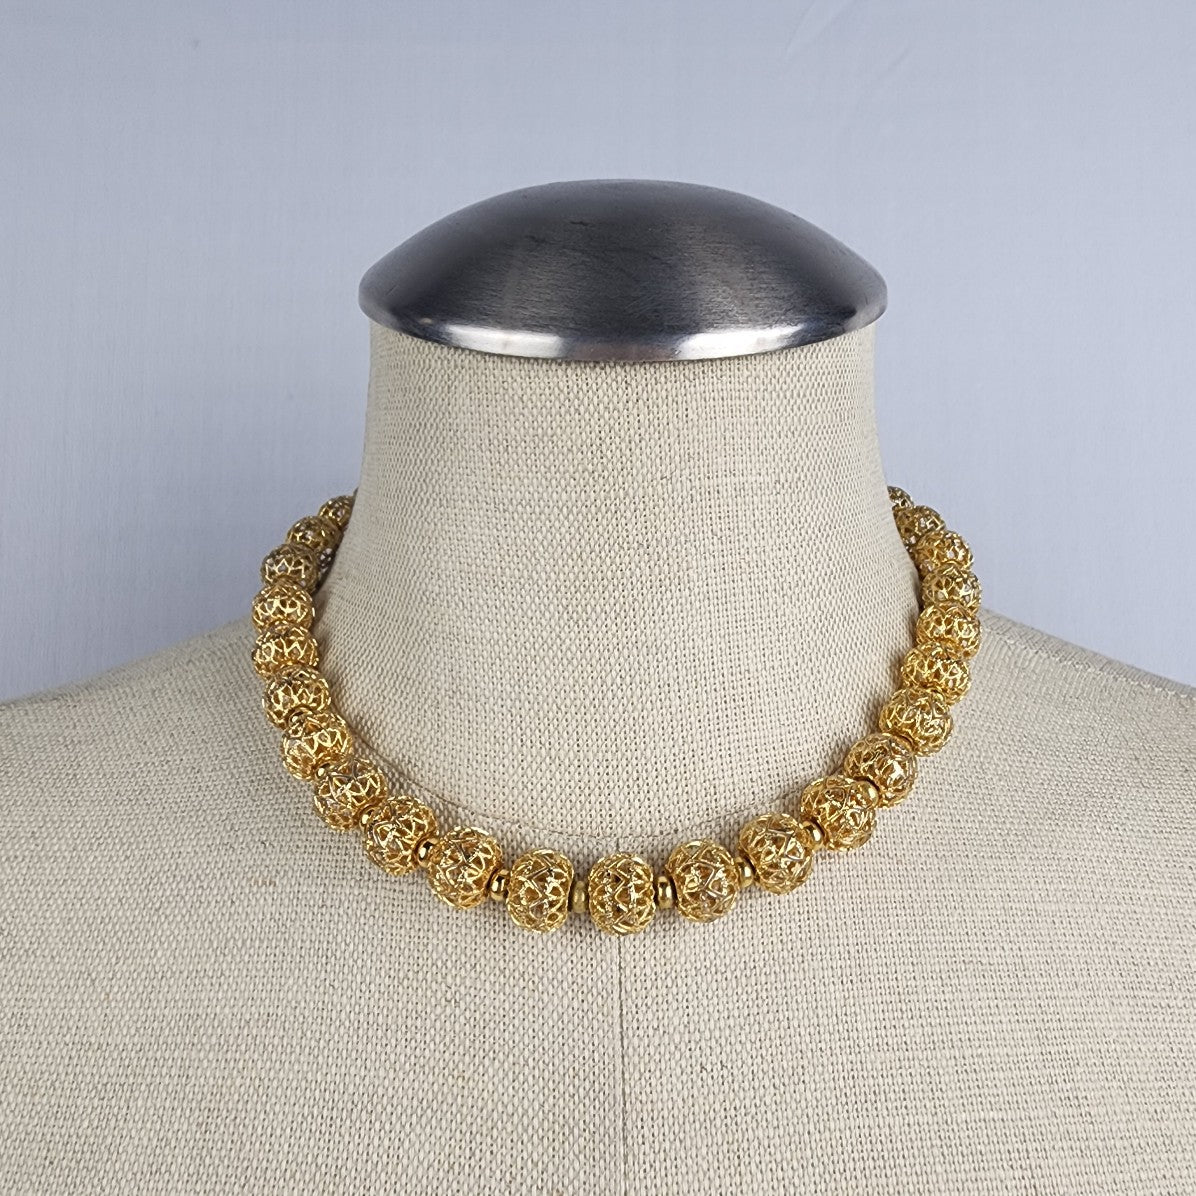 Vintage Vendome Gold Tone Carved Beaded Chain Necklace